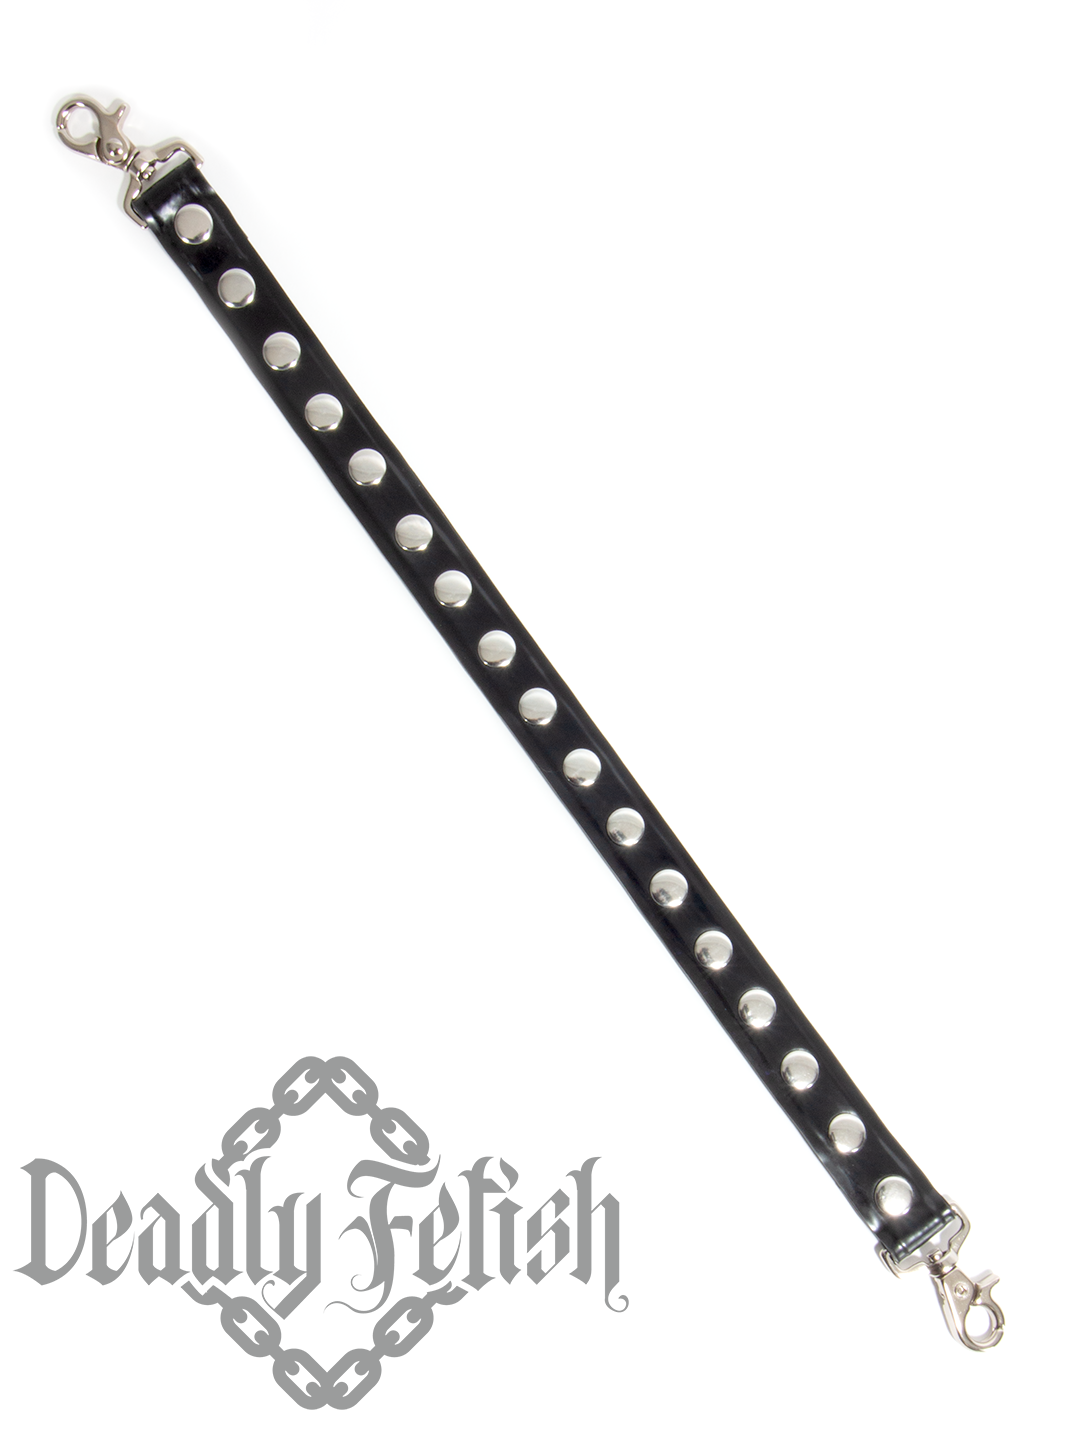 Deadly Fetish Made-To-Order Latex: Harness Addition #15 Bondage Strap with Rivets